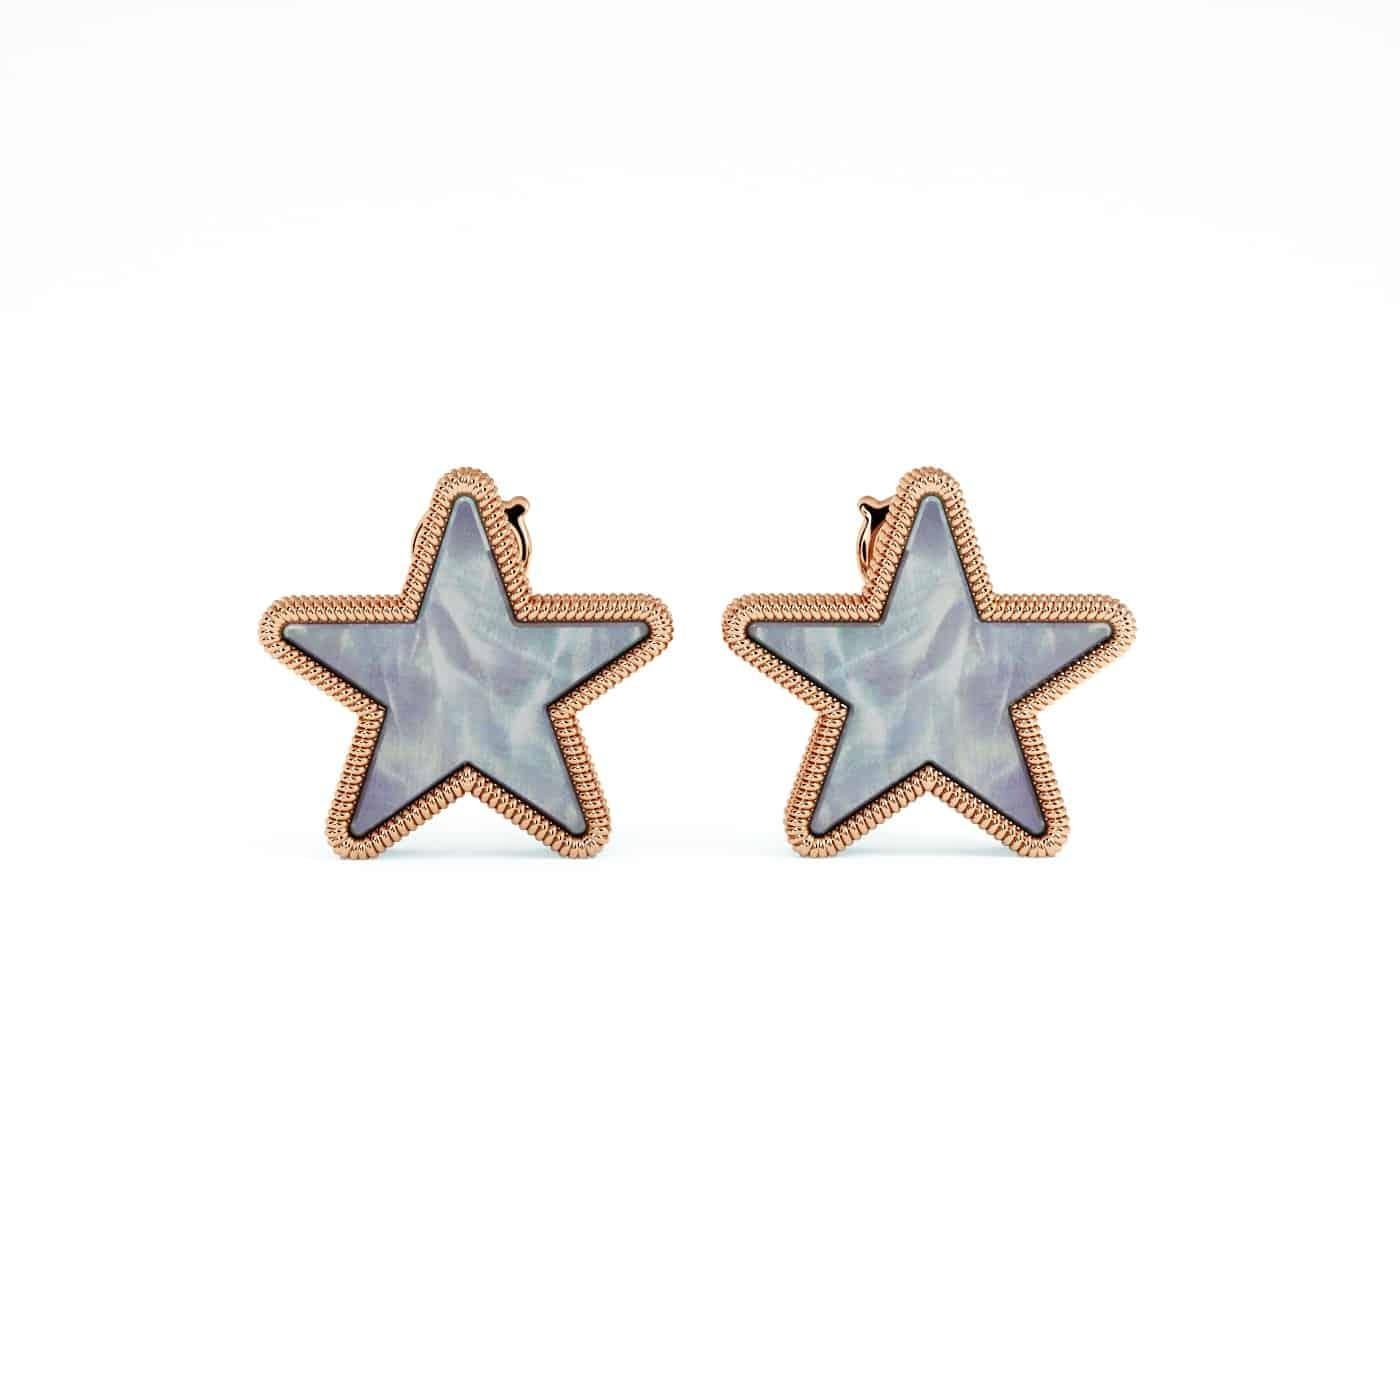 Each striking & spangled star is precisely carved from natural gemstones and encased in a beautiful solid gold rope finish with no visible prongs, creating a one-of-a-kind piece that brings double the luck and confidence to its wearer

18 Karat